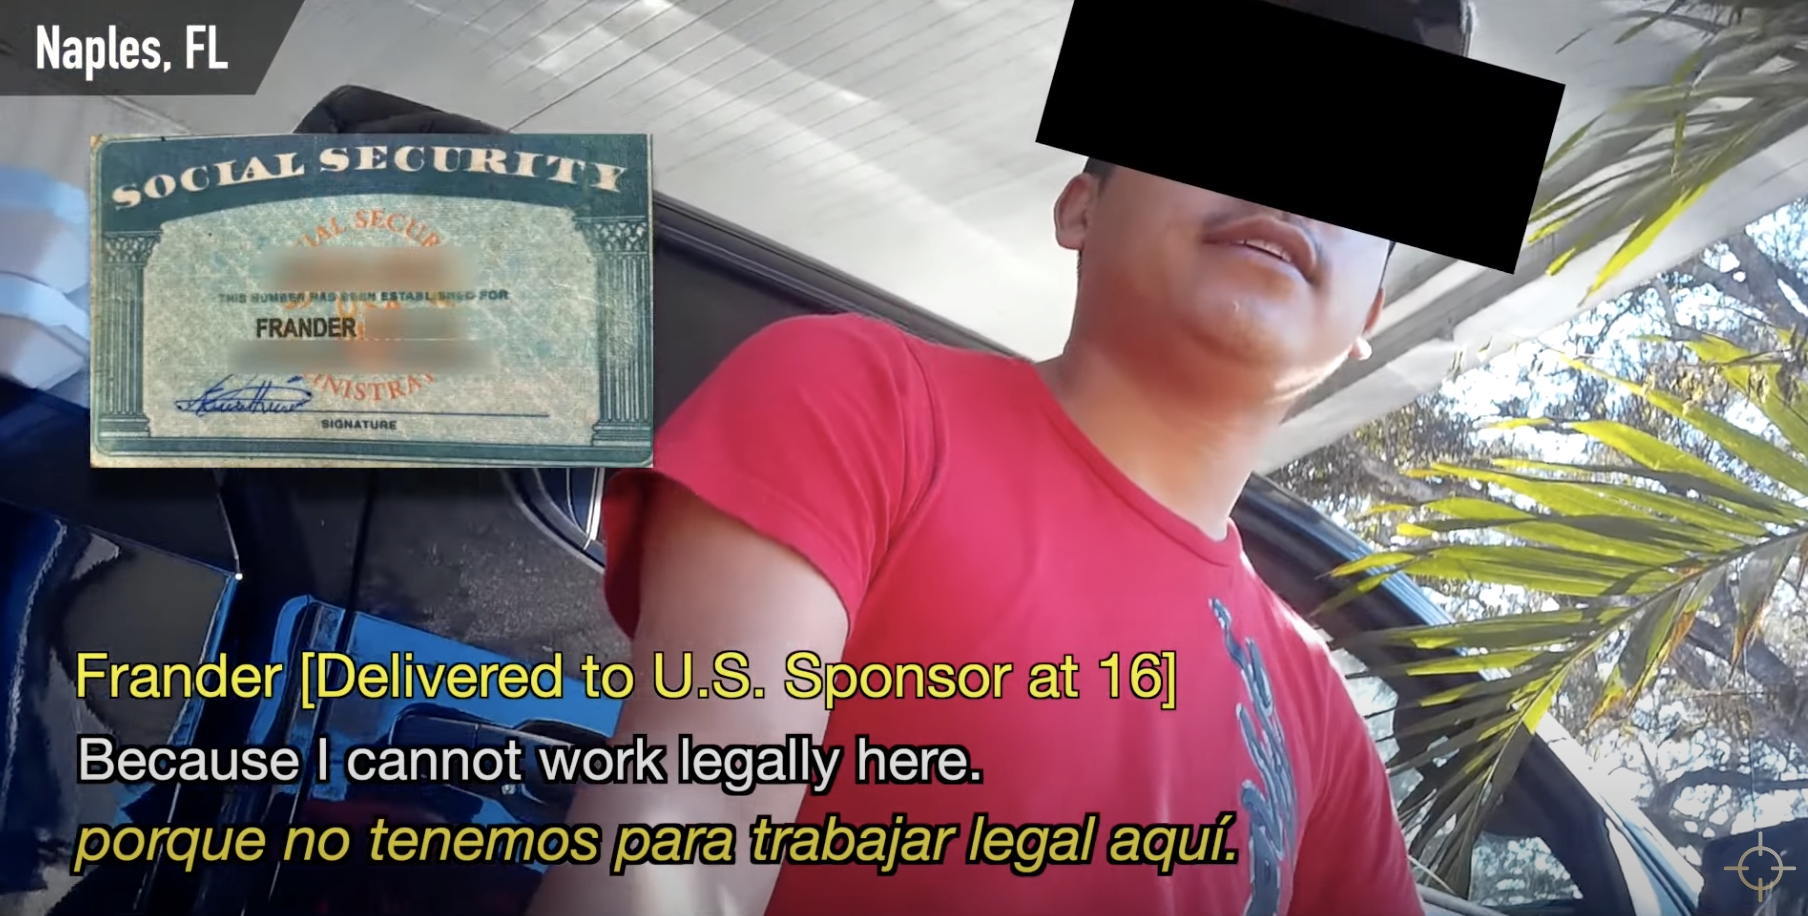 Traffickers Exploiting Illegal Child Labor With Social Security Fraud; Underage Migrant: ‘I Started Working’ To Pay Cartel Debt